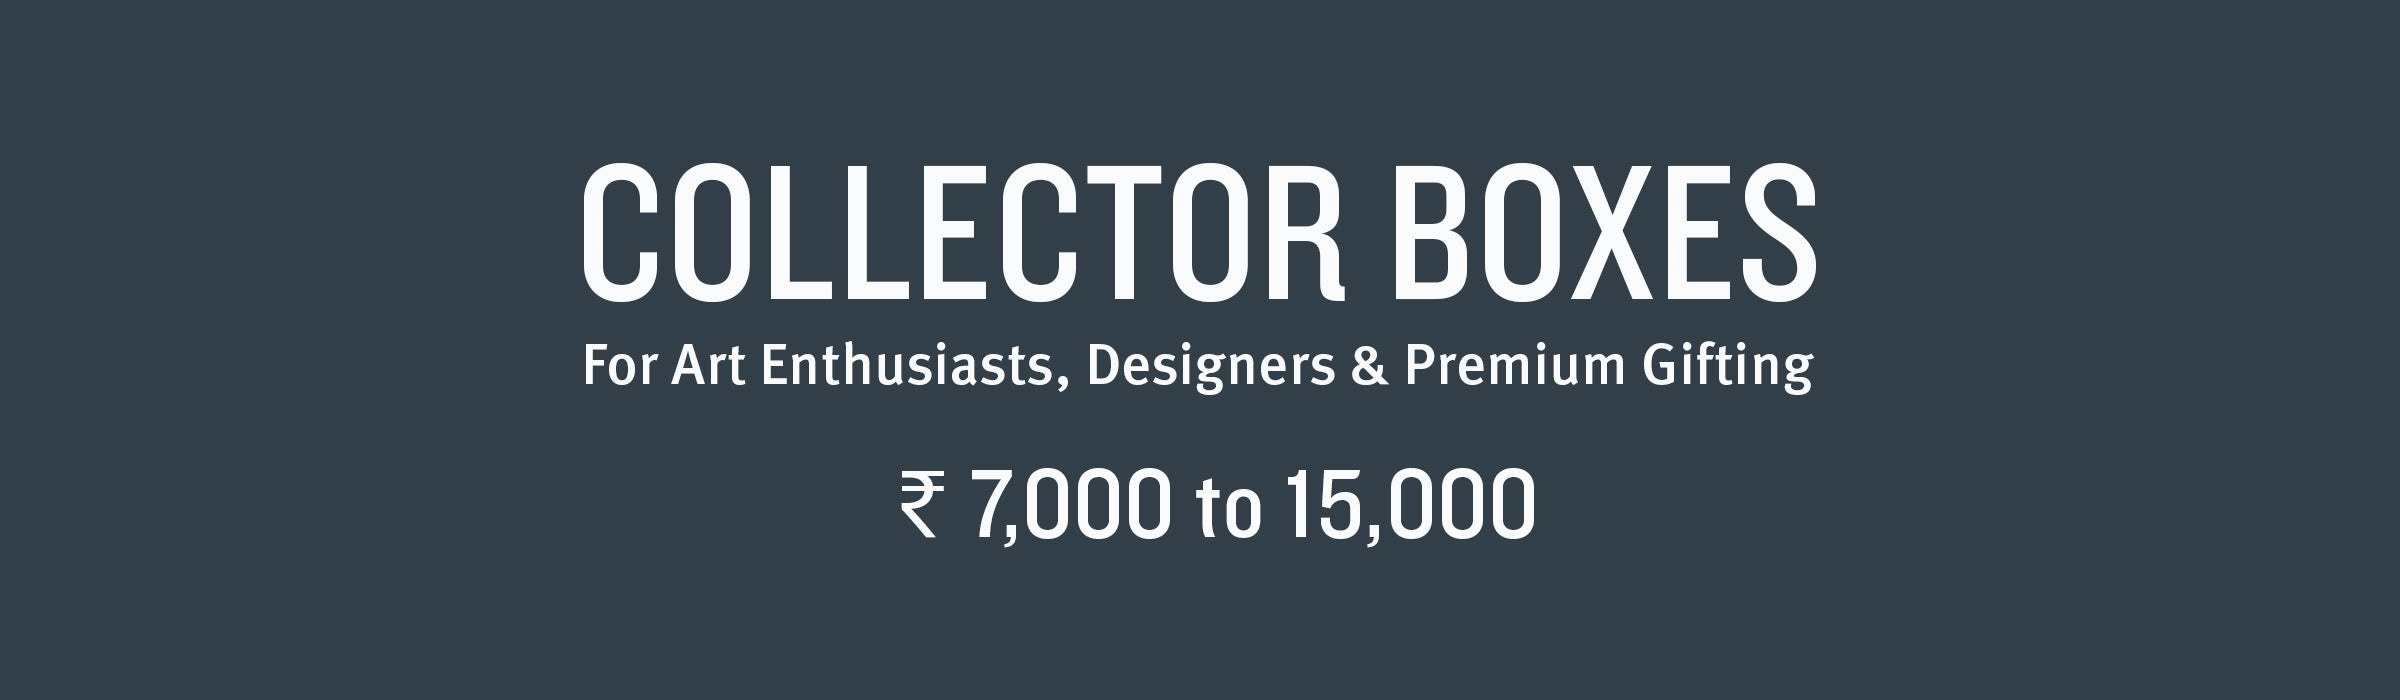 Collector-Box-Banner-May-24-updated-price.jpg__PID:424443b8-617c-452b-a83f-824f3b0009f7